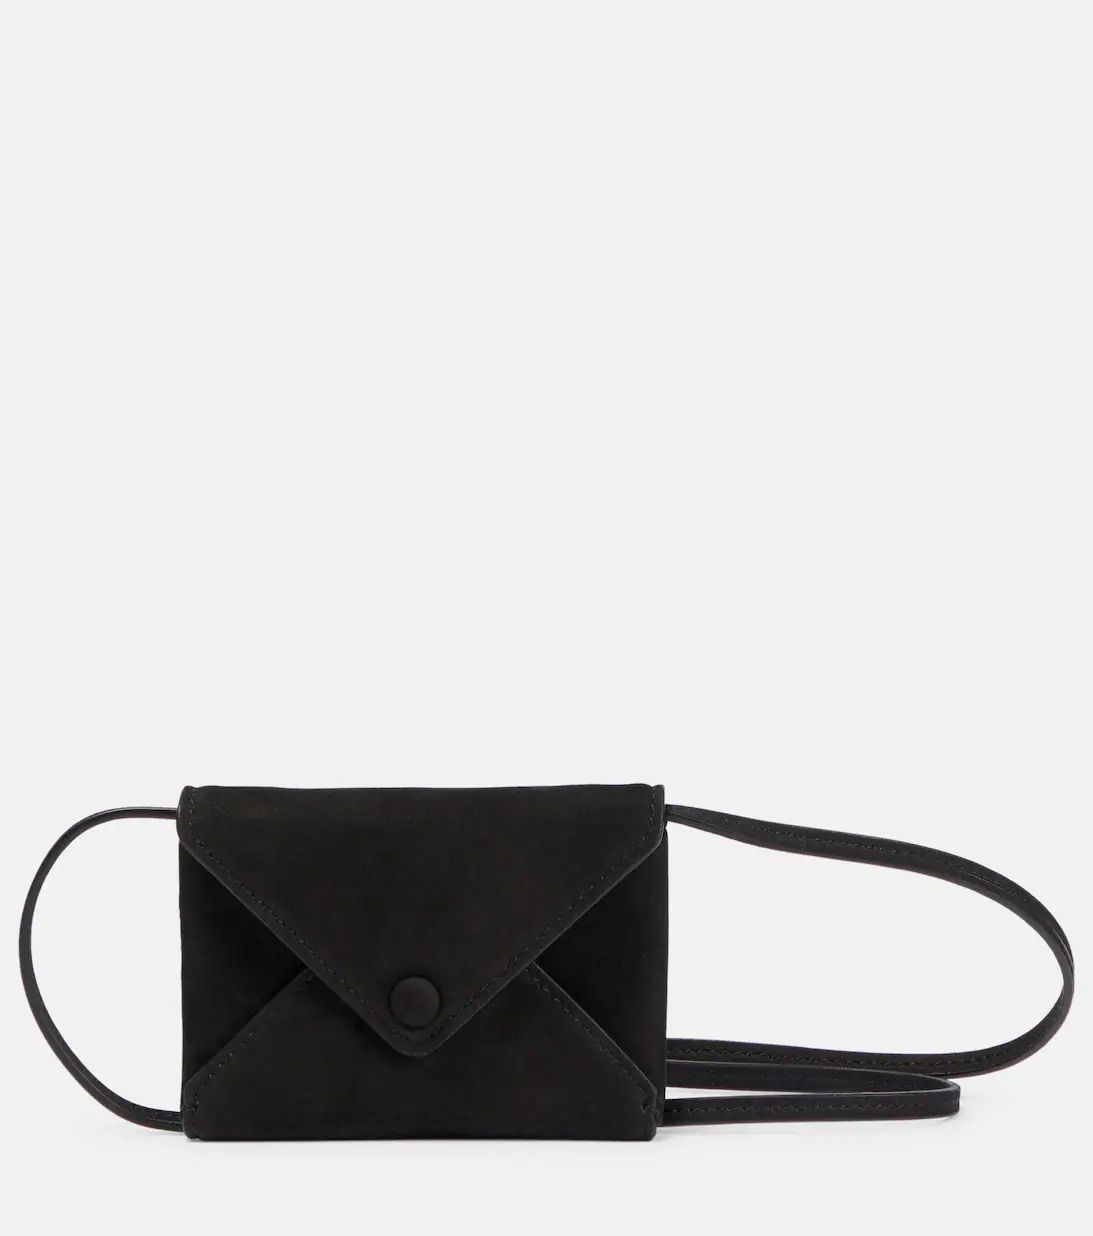 <p><strong>$2006.00</strong></p><p>When one thinks of a fanny pack, a well-sized pouch pocket likely comes to mind. But today, waist bags come in a range of sizes and silhouettes—including the barely-there skinny belt seen throughout fashion month. </p><p>The Row's belt bag is fit with a single envelope compartment to hold smaller essentials—like credit cards, an ID, and other key cards. It's great for days that require light travel. Loop it through your favorite high-waisted slacks for a cinched look or around your neck for easy access. </p><p><strong>Size: </strong>3 "H x 3.5 "W; 49" length shoulder strap. </p><p><strong>Material: </strong>Leather </p><p><strong>Colors: </strong>Black </p>